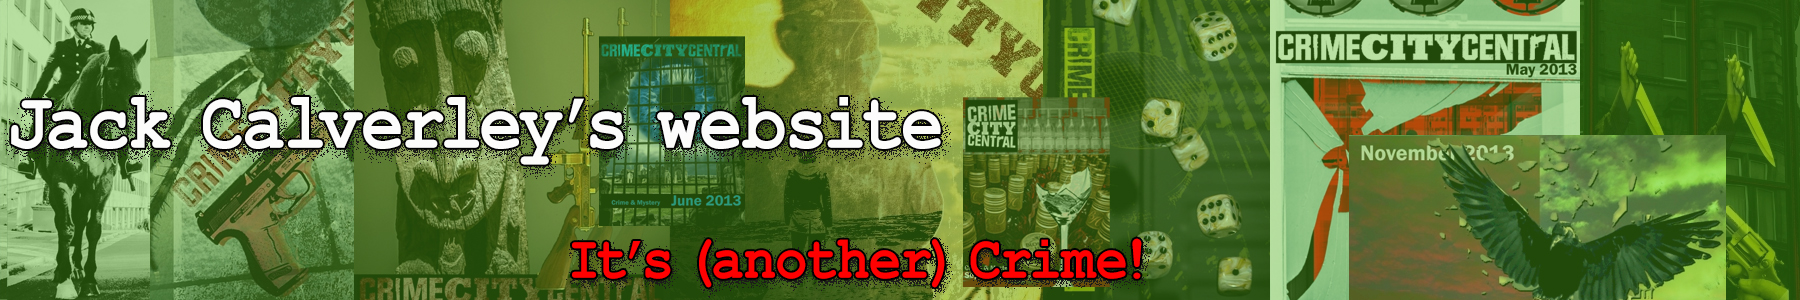 Collection of CrimeCityCentral covers